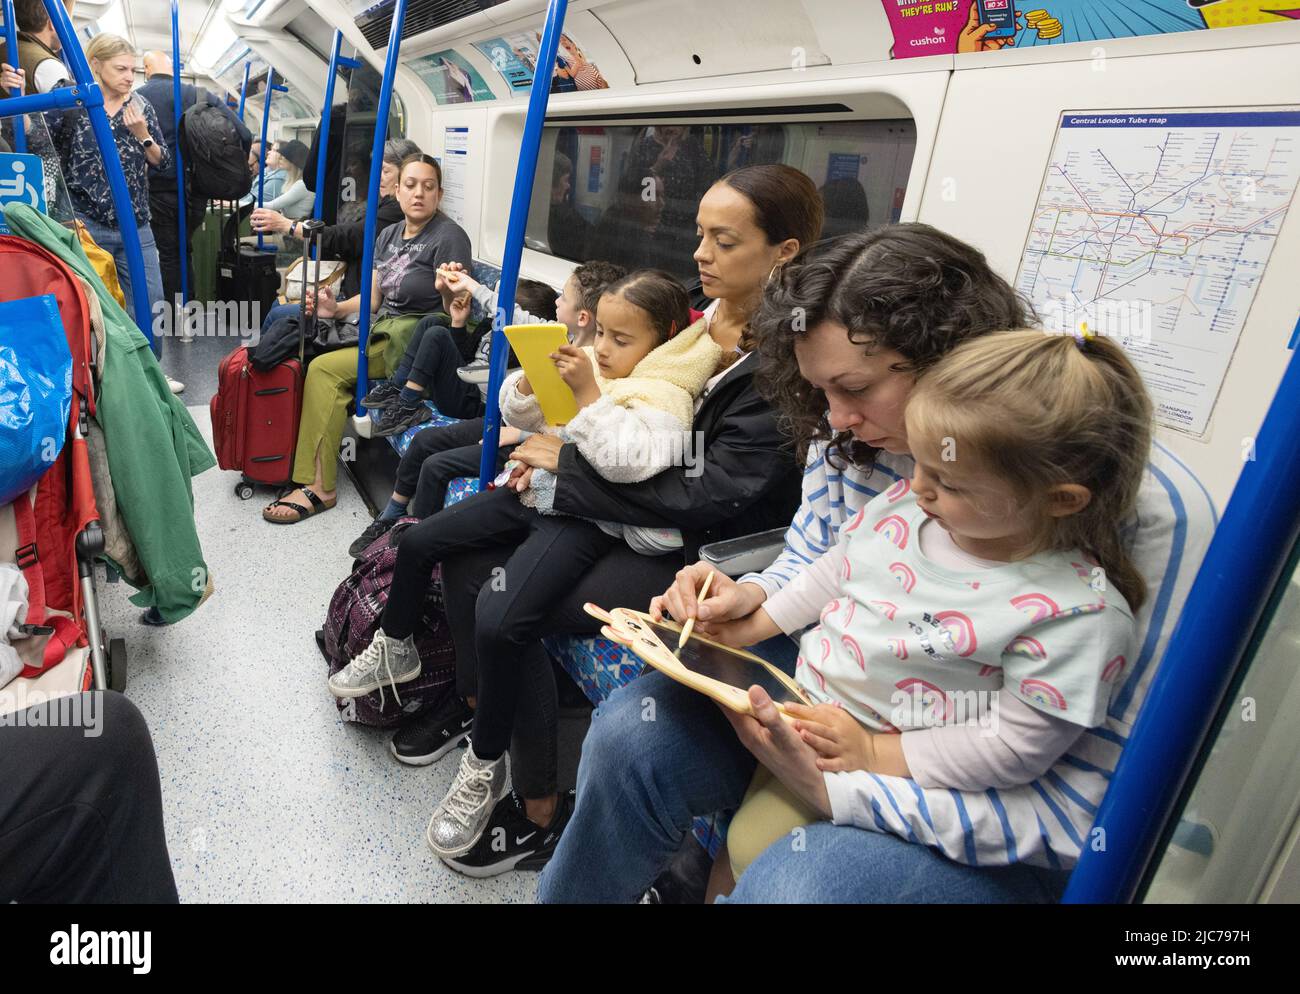 London children; Mothers keeping their children entertained in a London Underground train carriage, London transport, TFL, London England UK Stock Photo